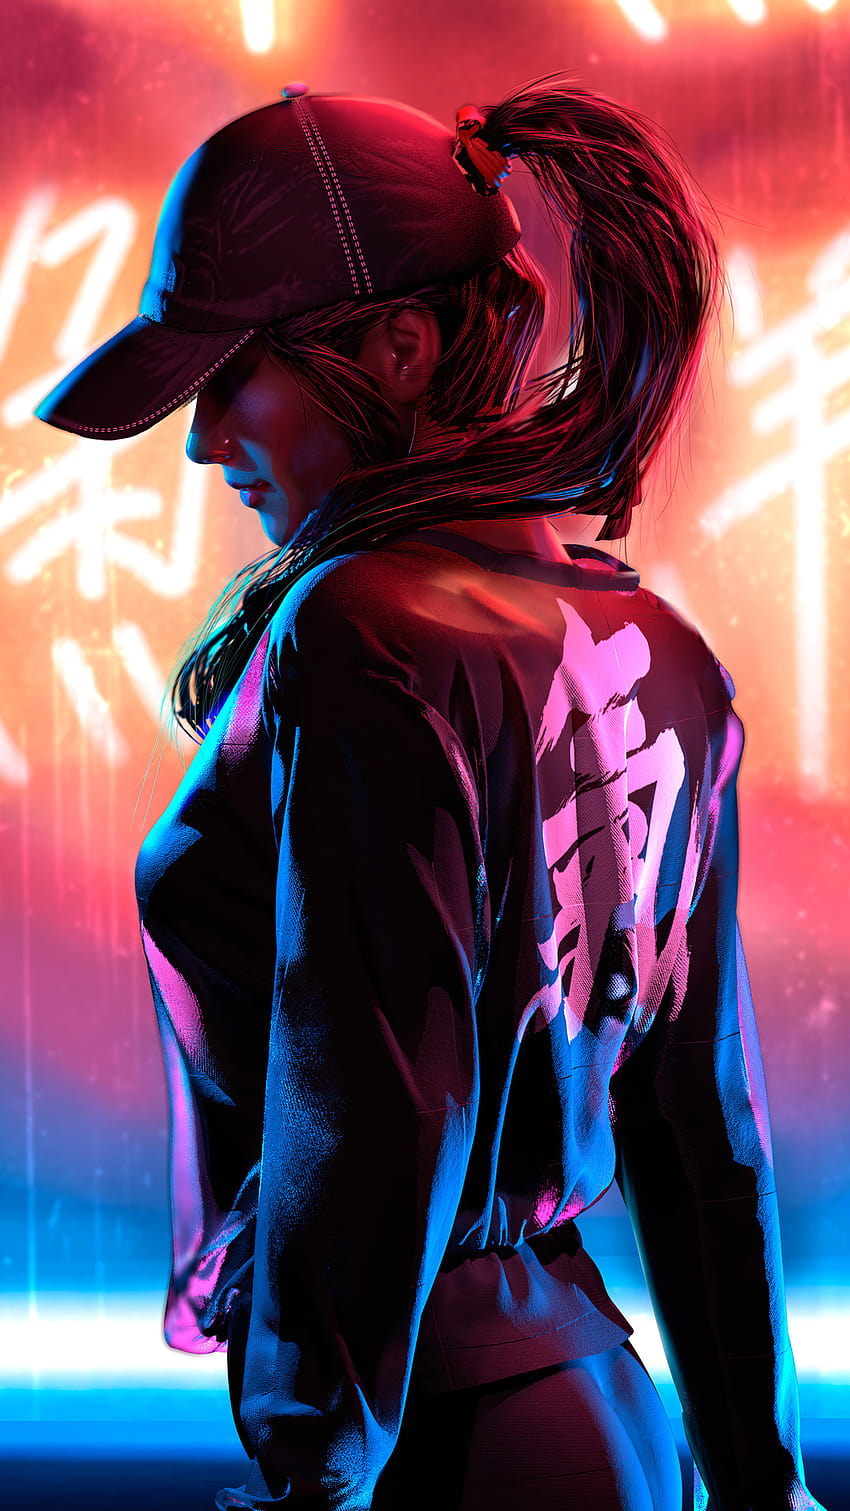 1080x1920 Hat Neon Girl Iphone 7,6s,6 Plus, Pixel xl ,One Plus 3,3t,5 , Backgrounds, and, iphone girl HD phone wallpaper